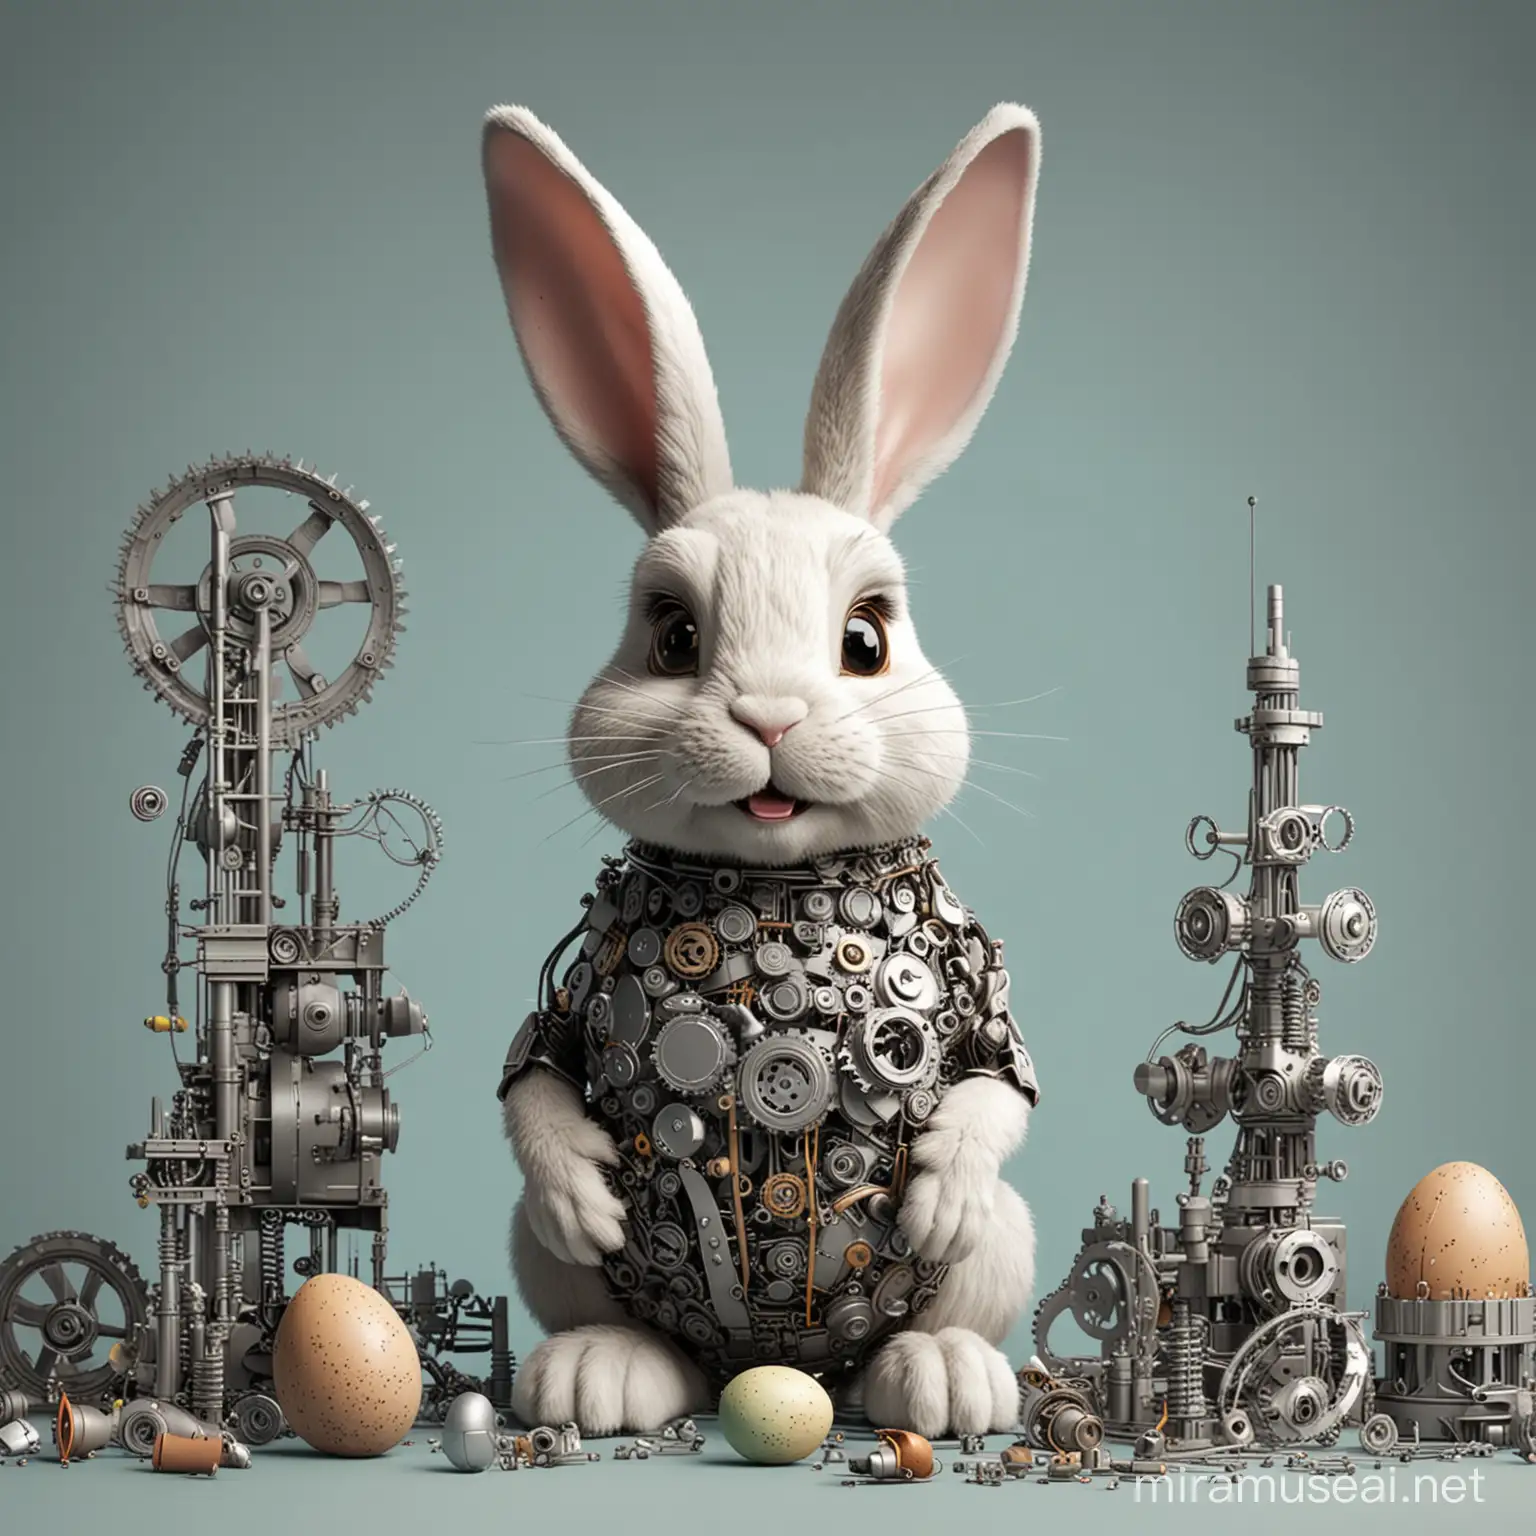 Joyful Easter Robotic Bunny Crafted from Engineering Components